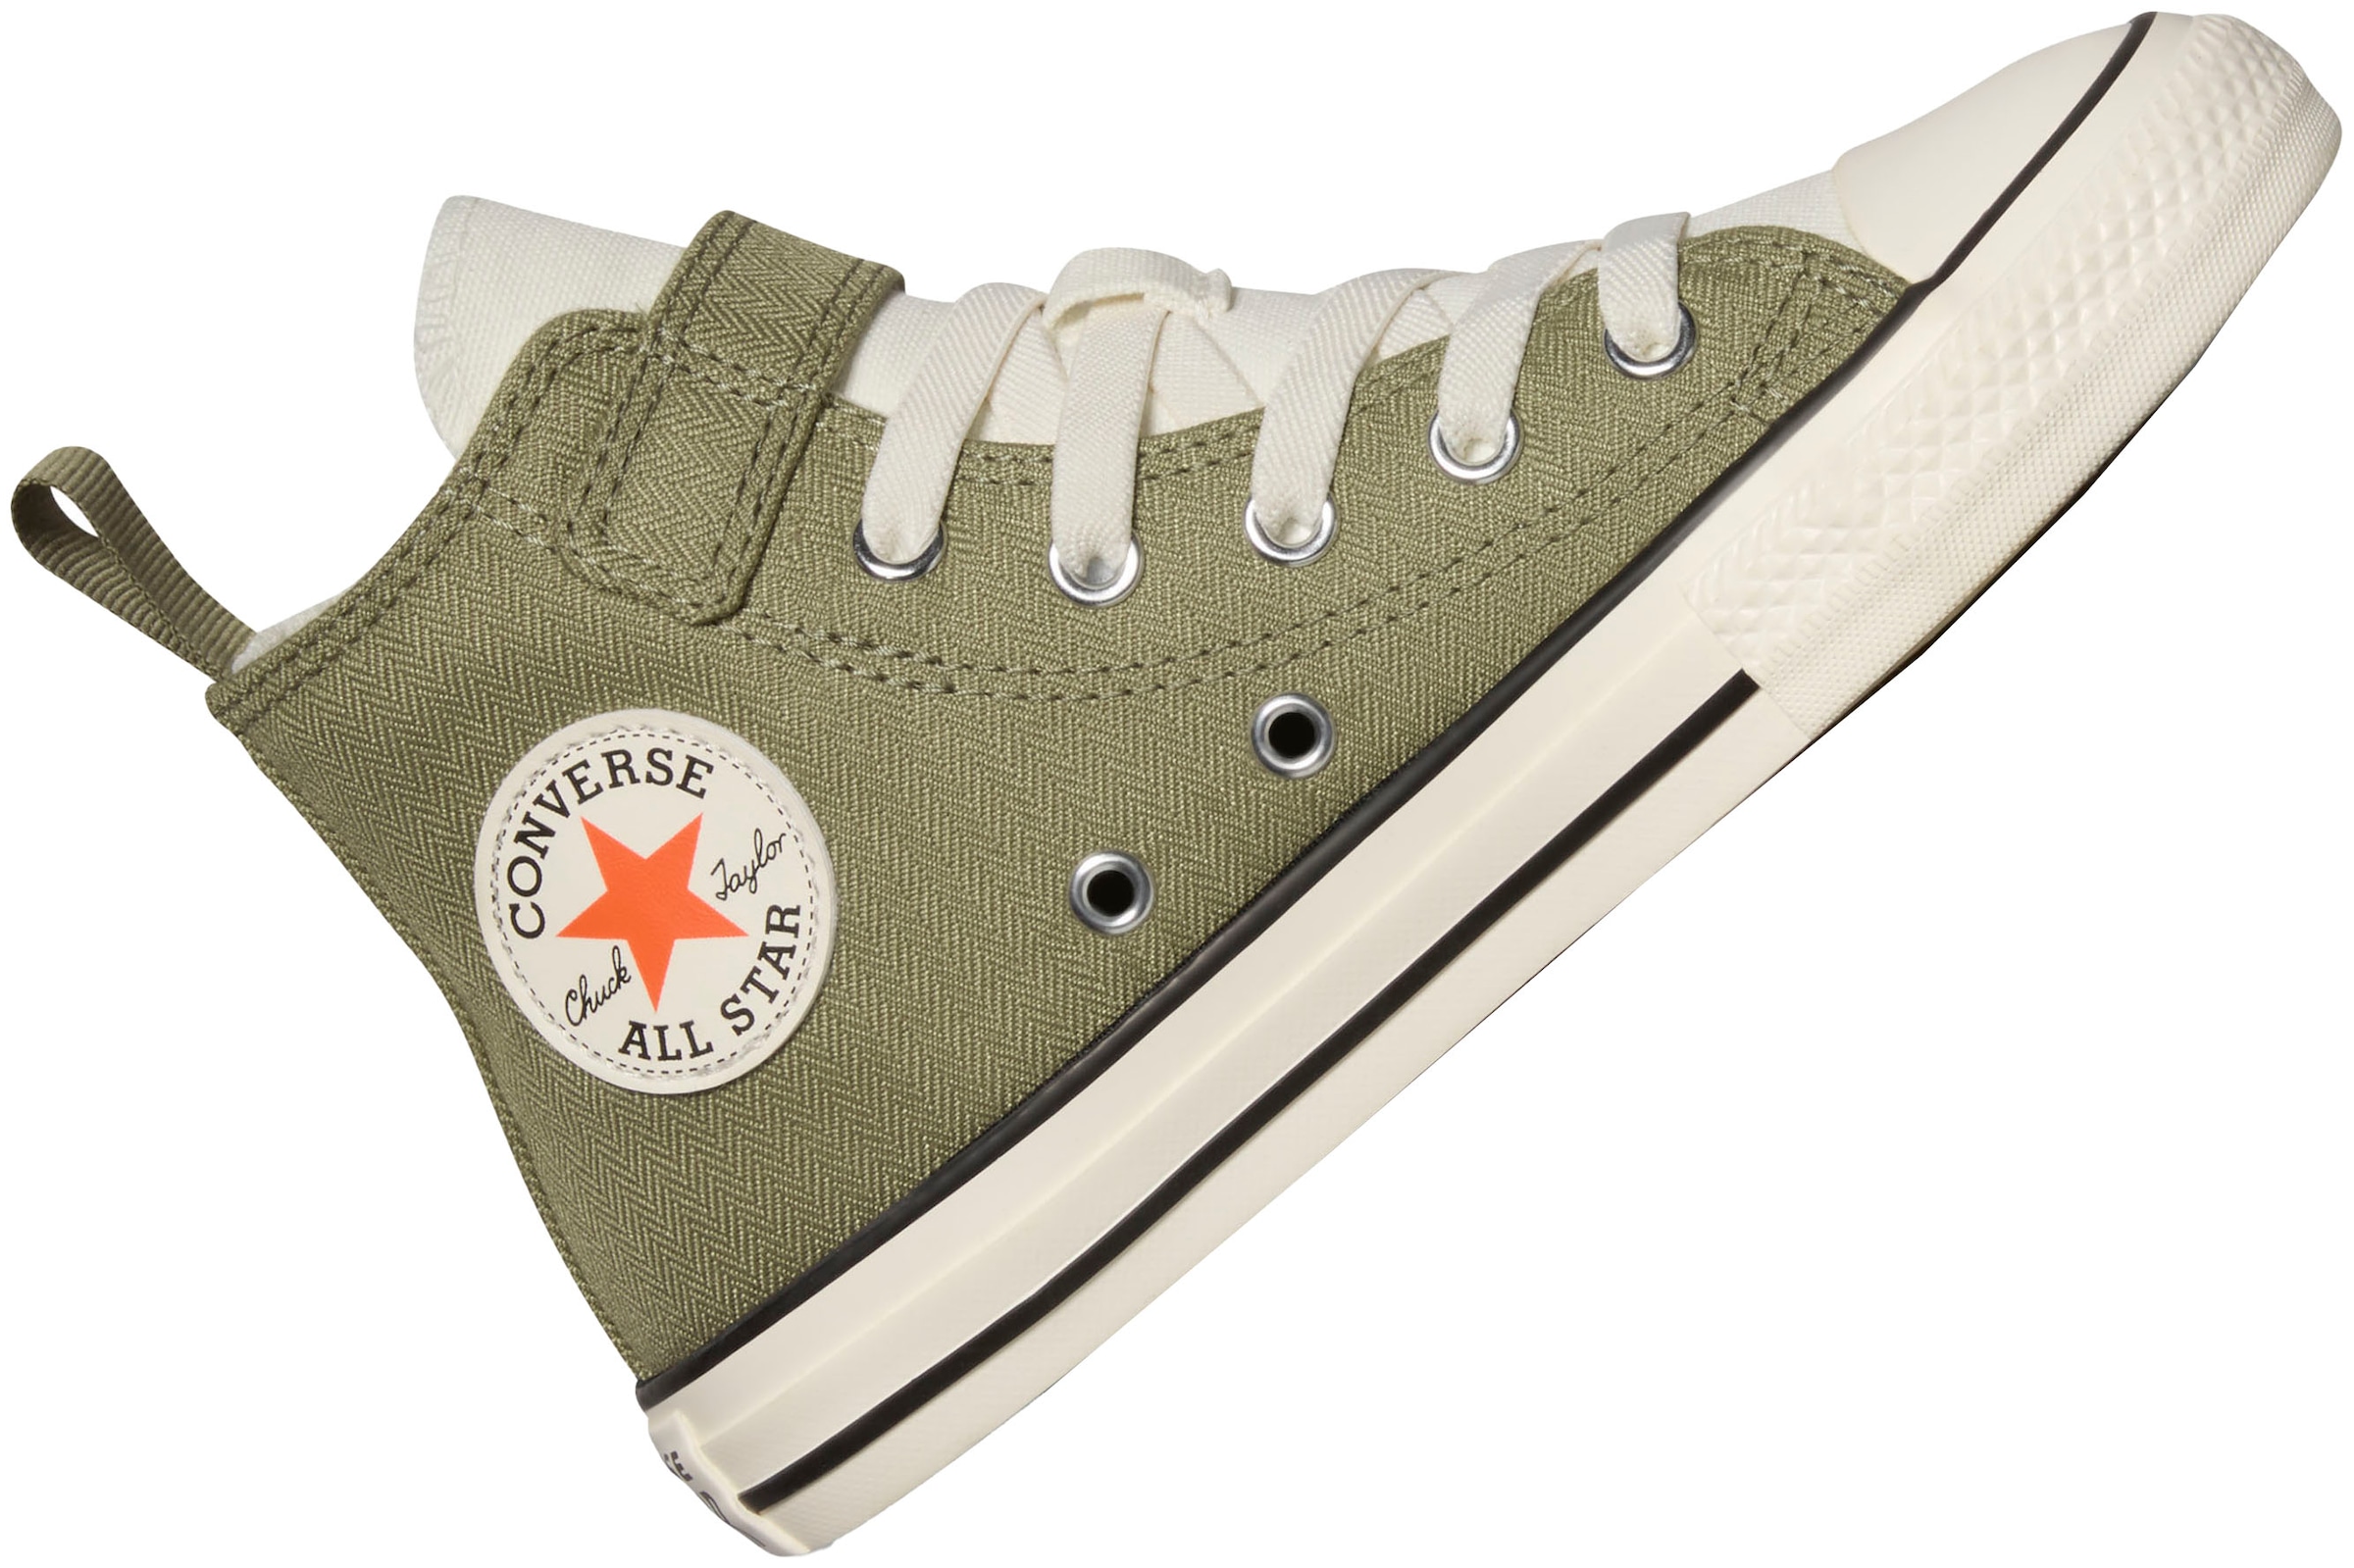 Converse Sneaker »CHUCK TAYLOR ALL STAR EASY ON«